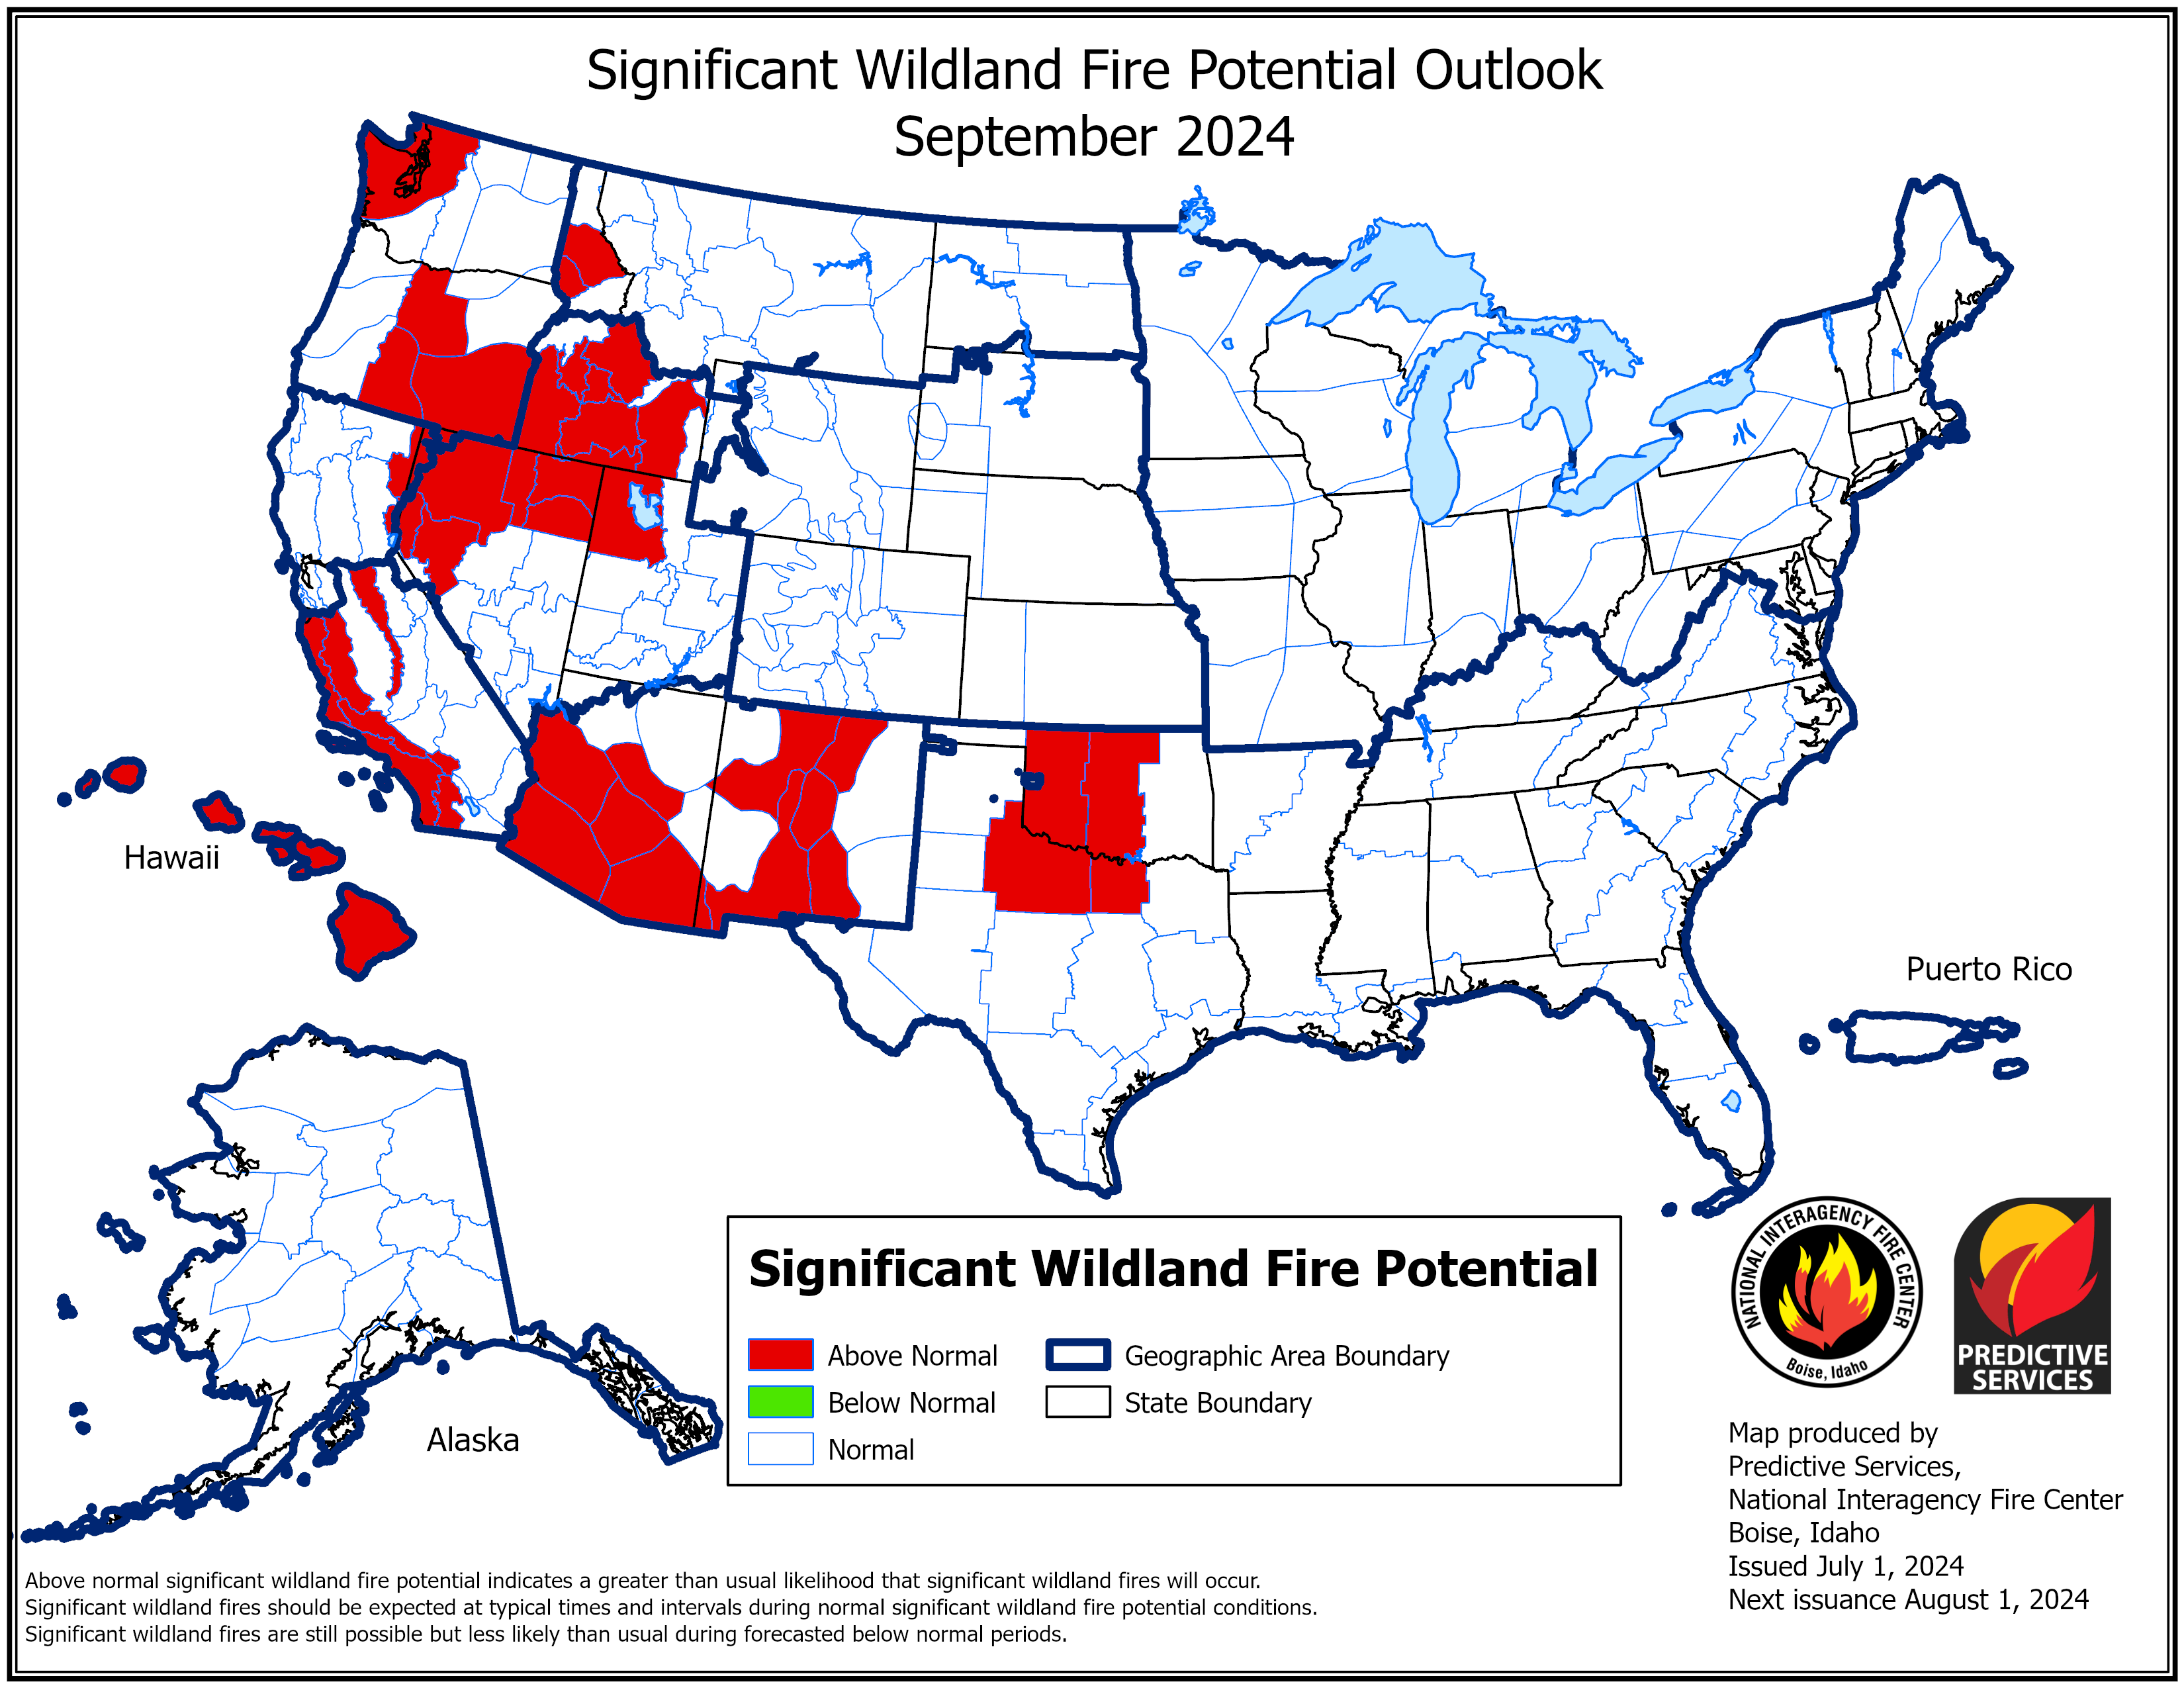 Significant Fire Potential Outlook Image for September